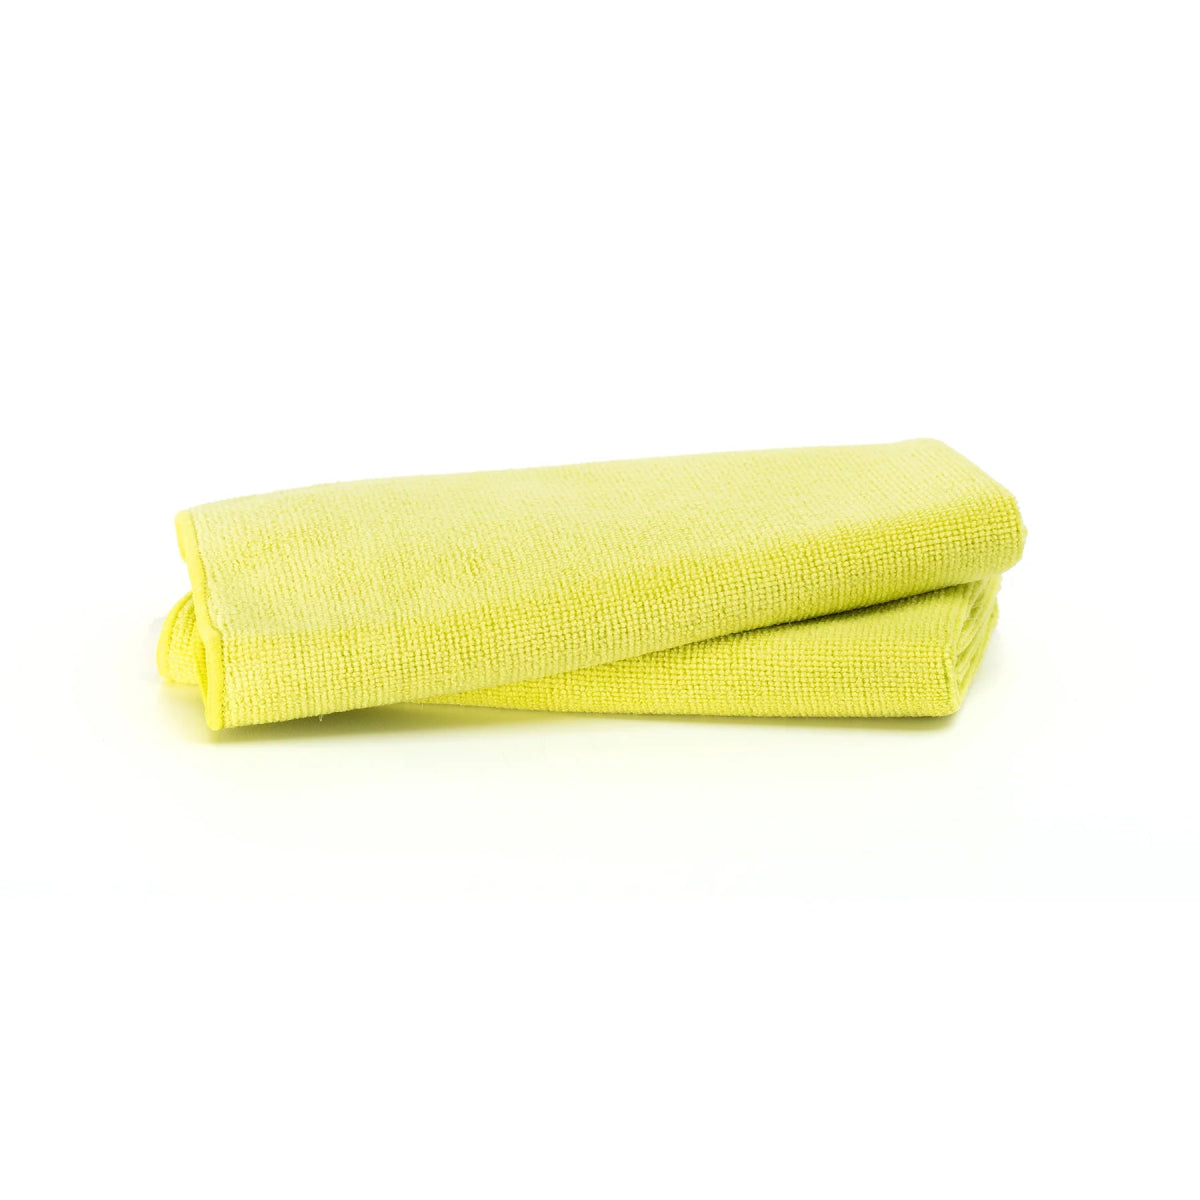 Roadie Soft All Purpose Cloth - Neon Yellow (2 Pack) - Filthy Dog Decals